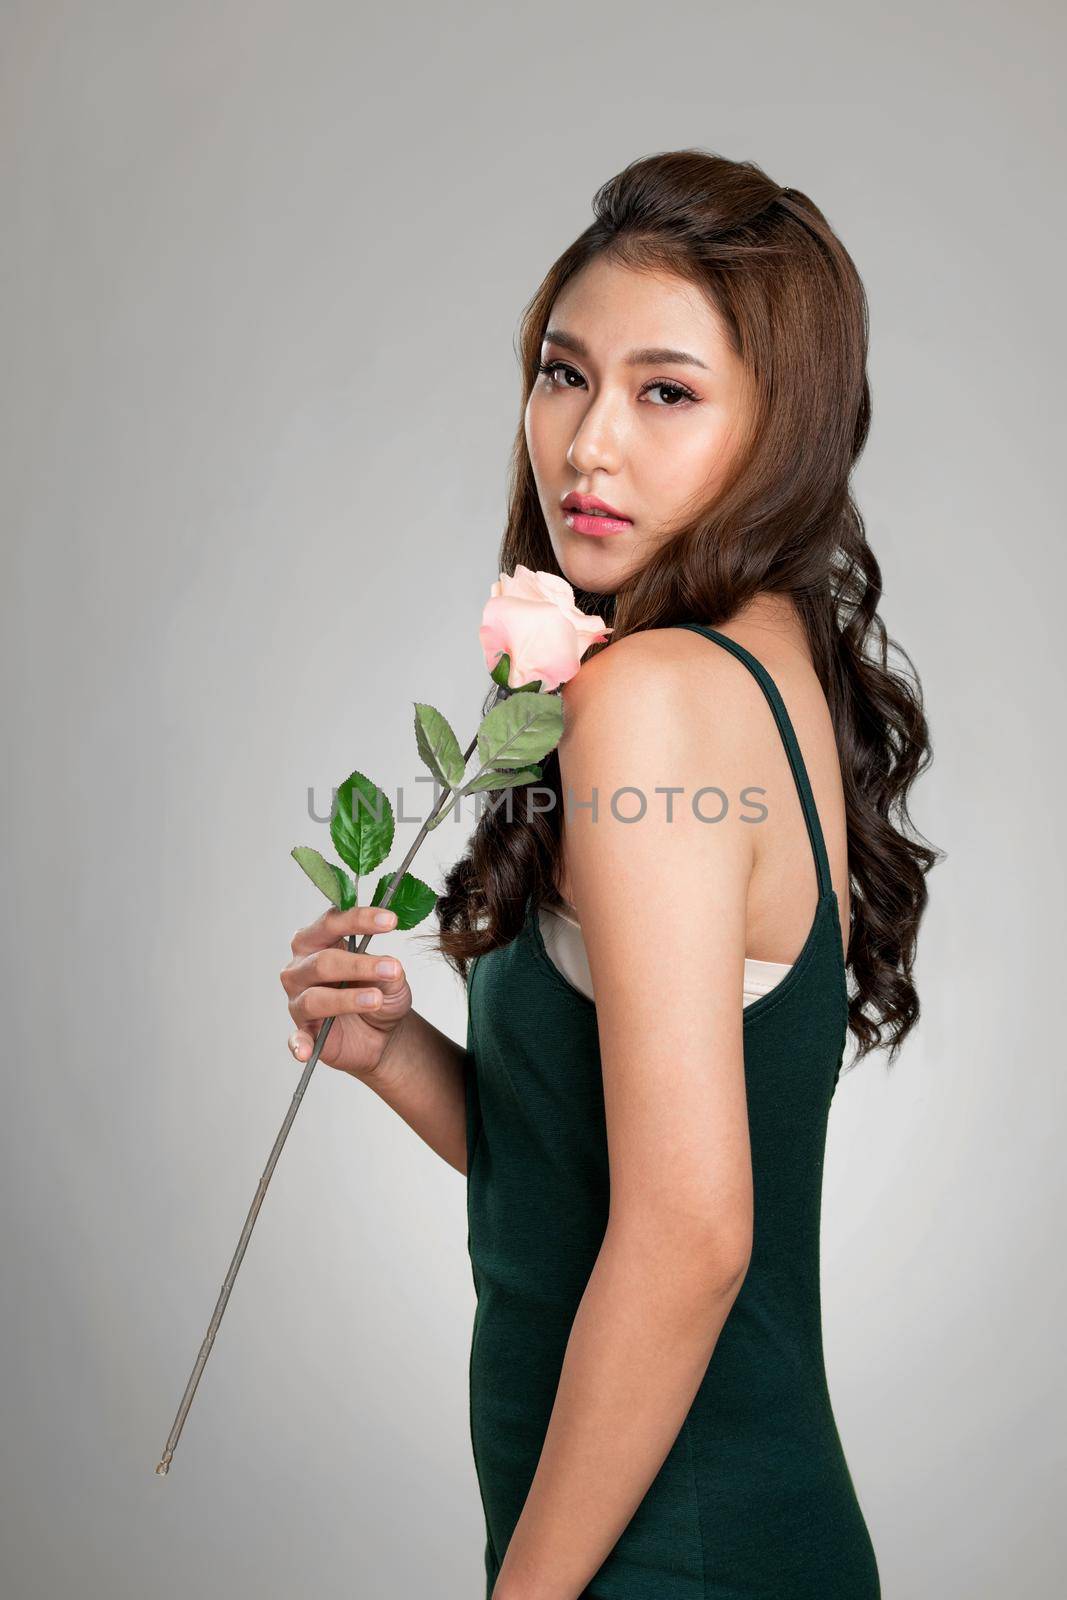 Ardent female model with fair skin and perfect makeup holding flowers. by biancoblue